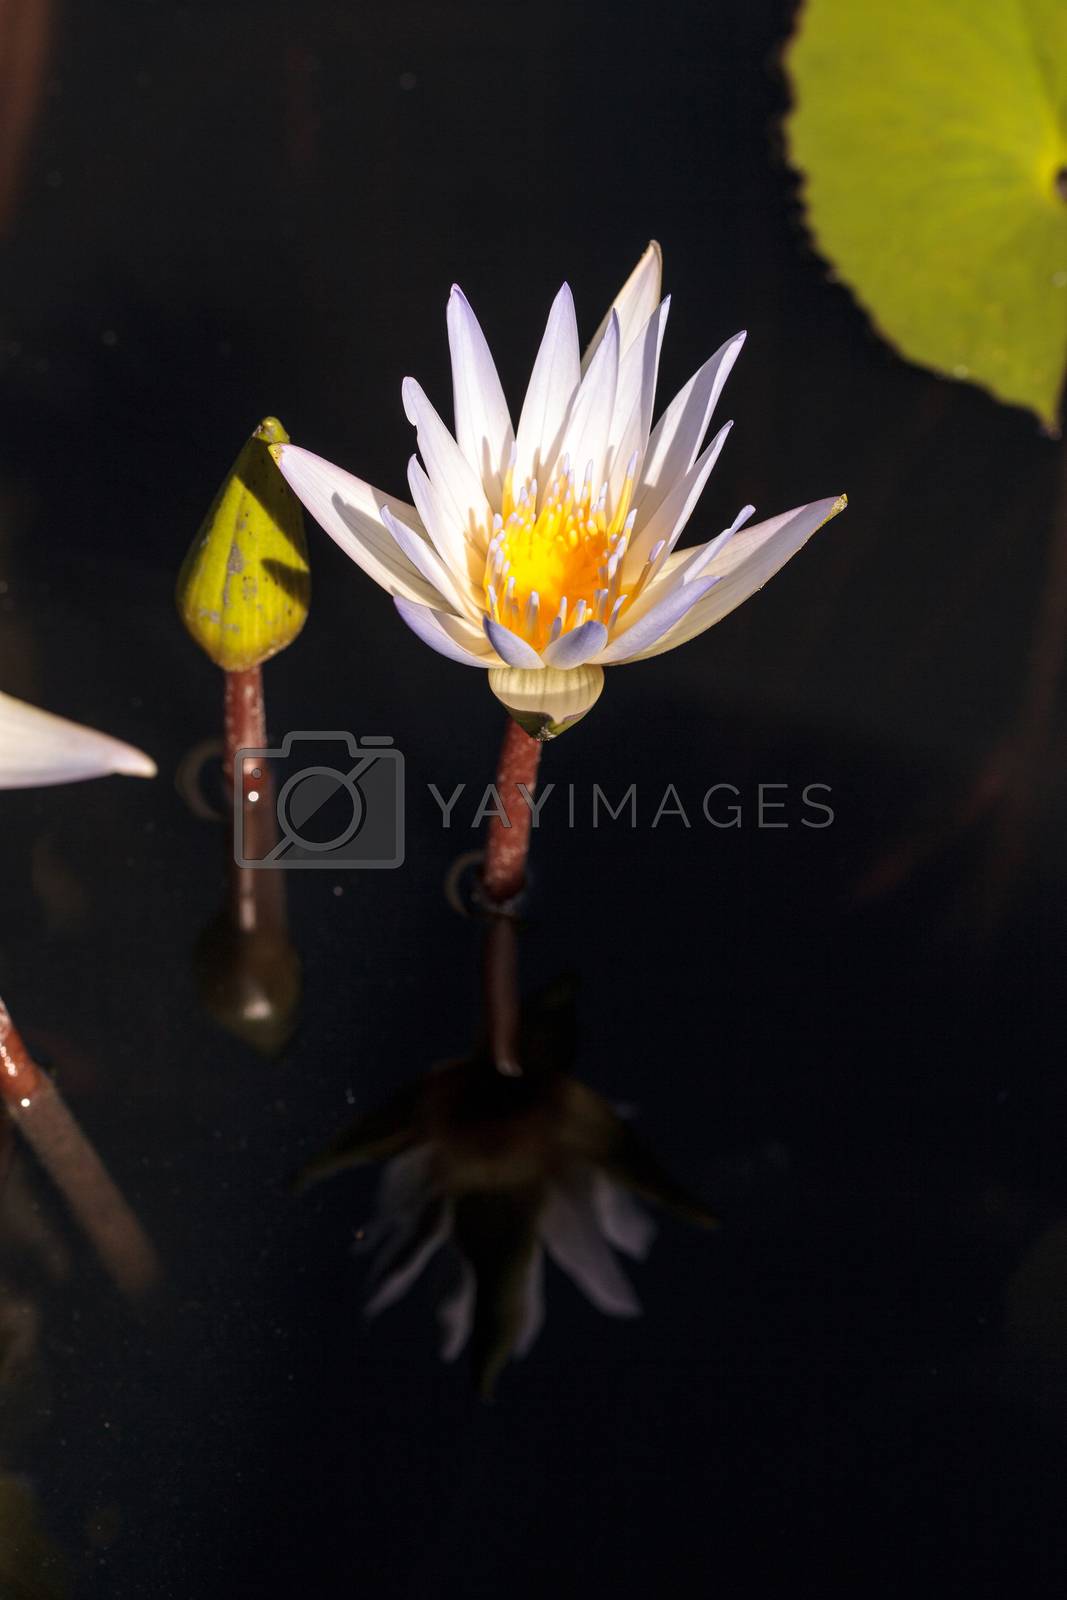 Royalty free image of White water lily Nymphaea blooms by steffstarr